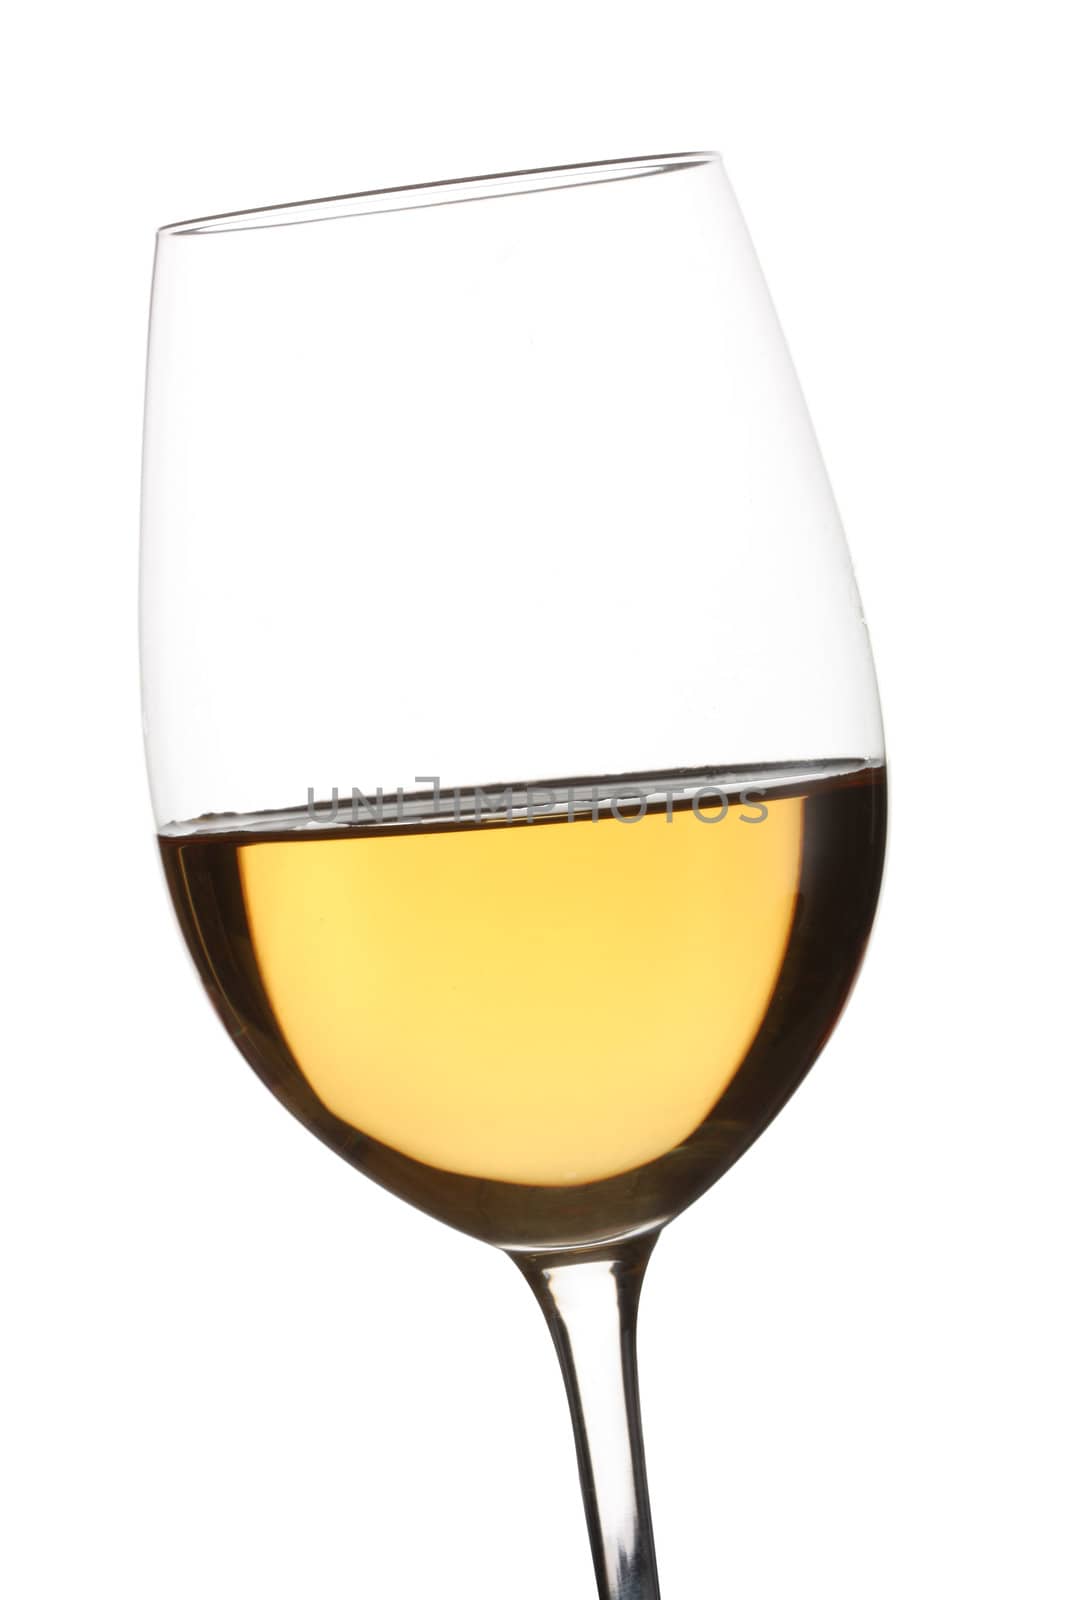 White wine glass isolated over white background